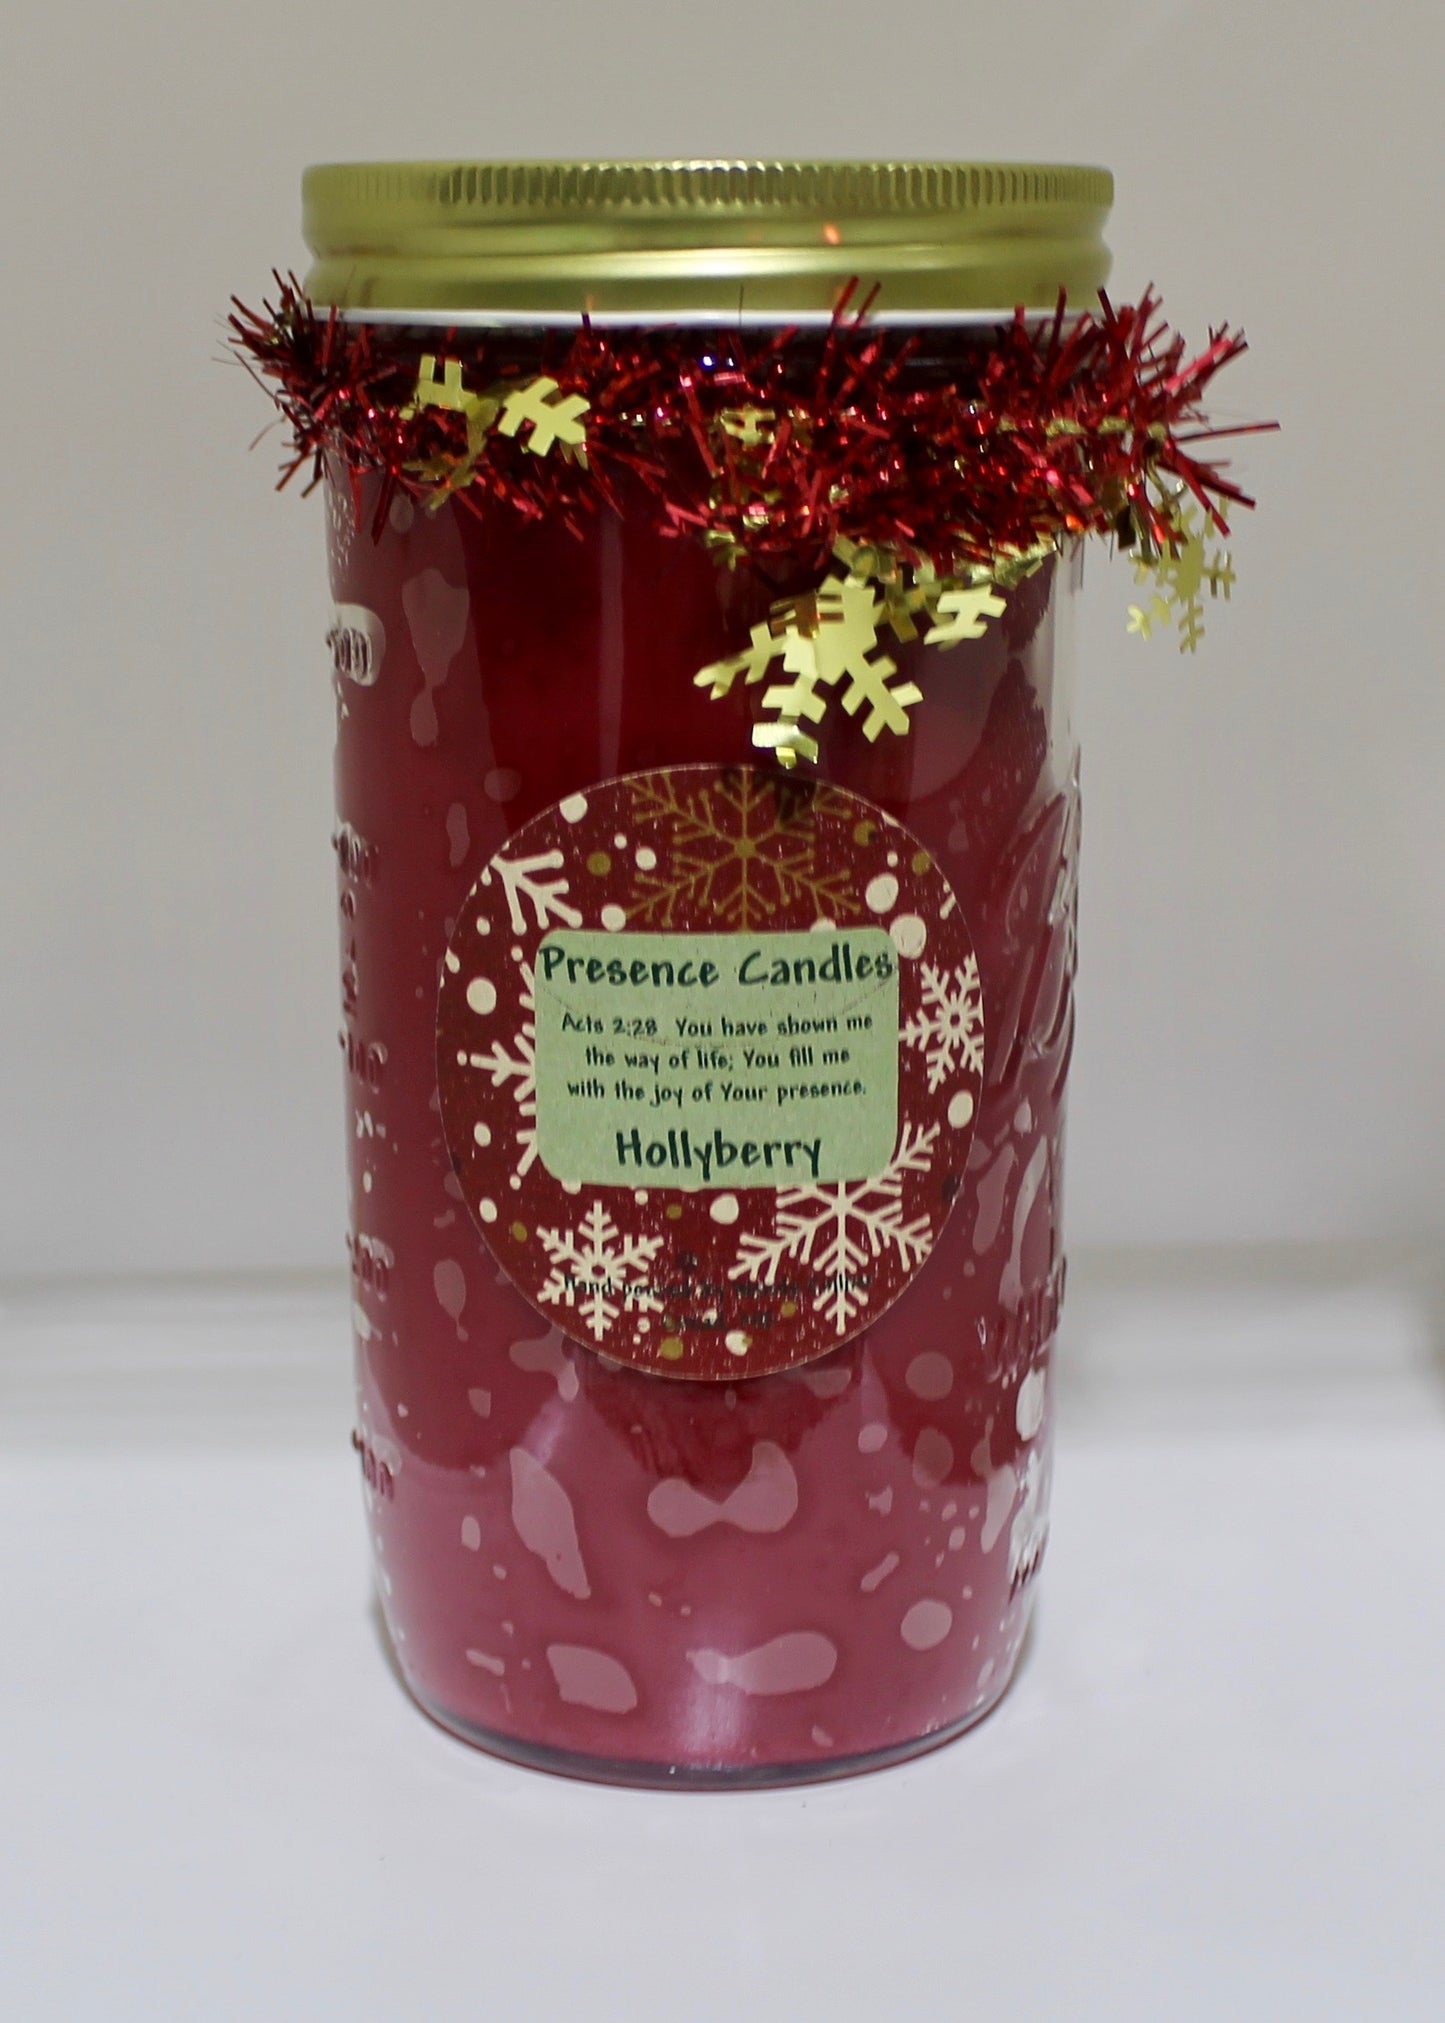 Hollyberry Scented Candle